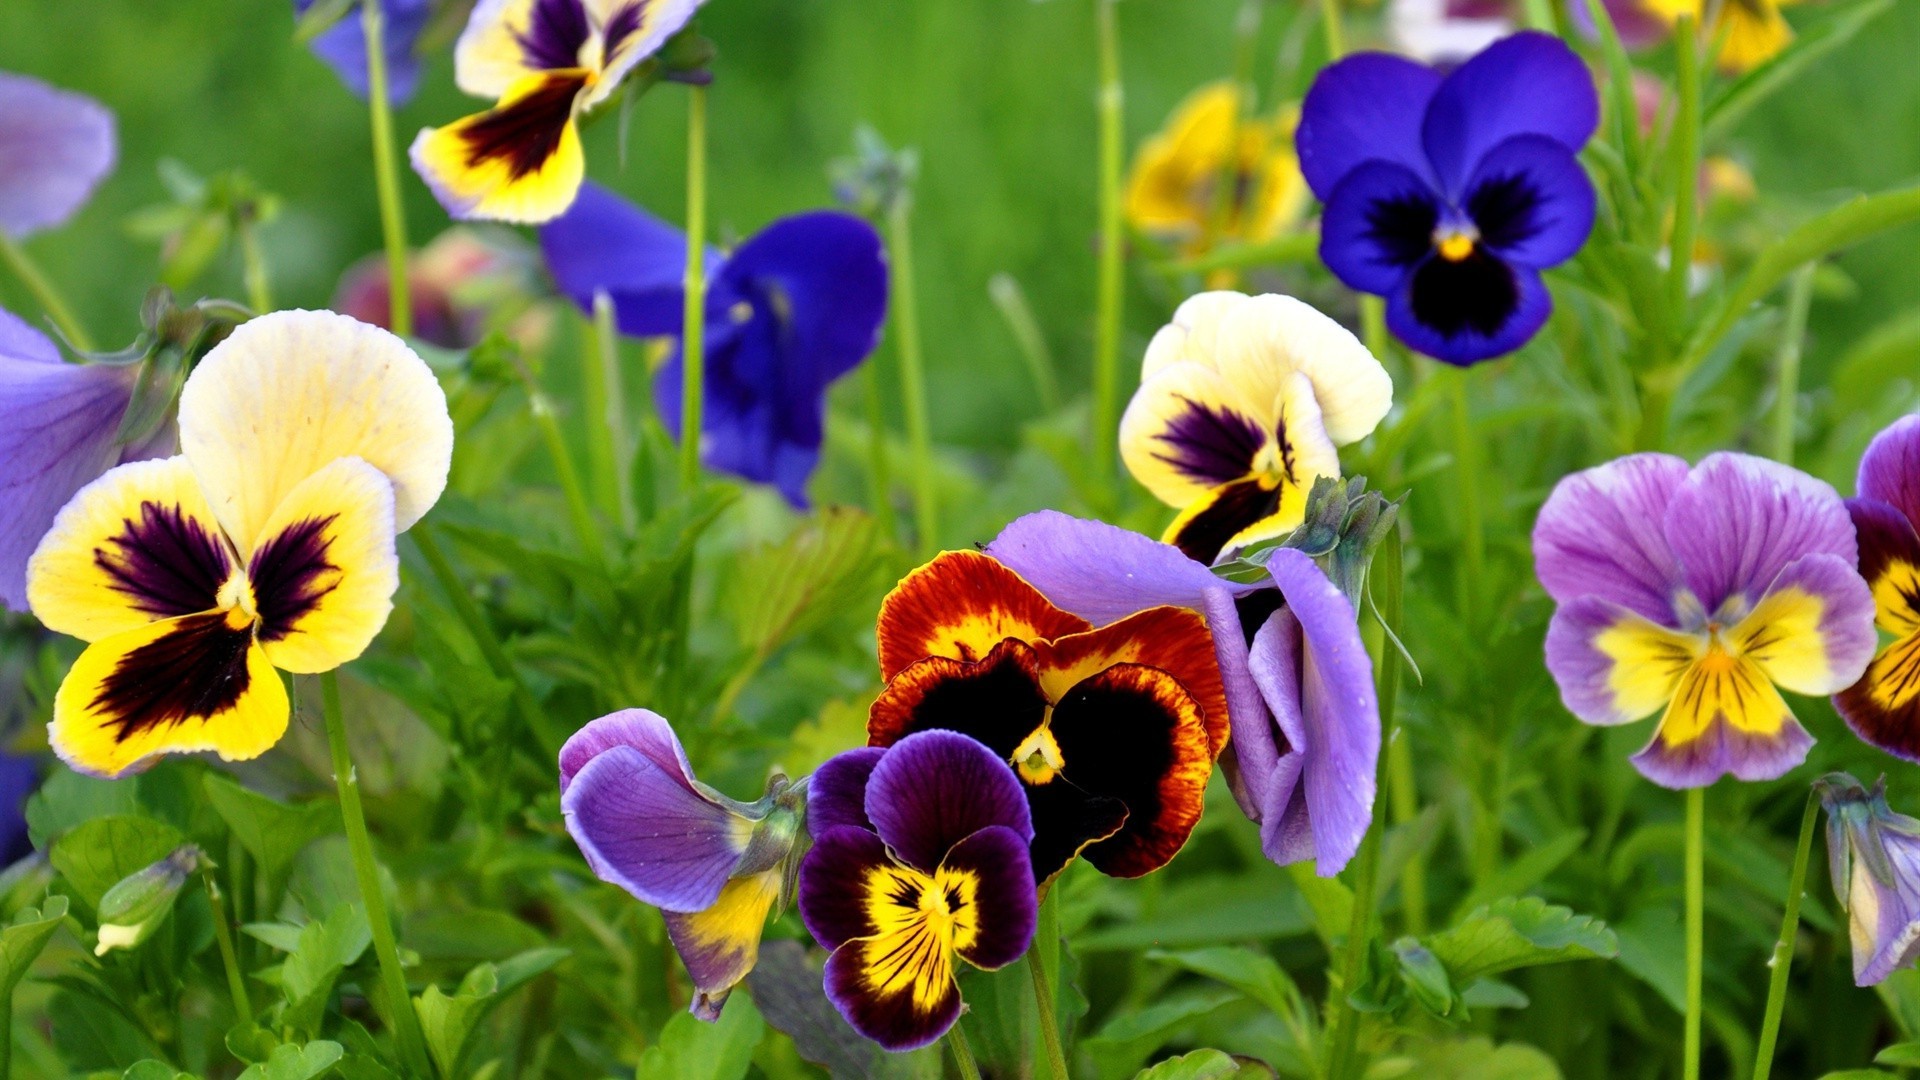 flowers flower nature garden flora floral summer leaf pansy field blooming bright grass violet color viola hayfield growth petal vibrant